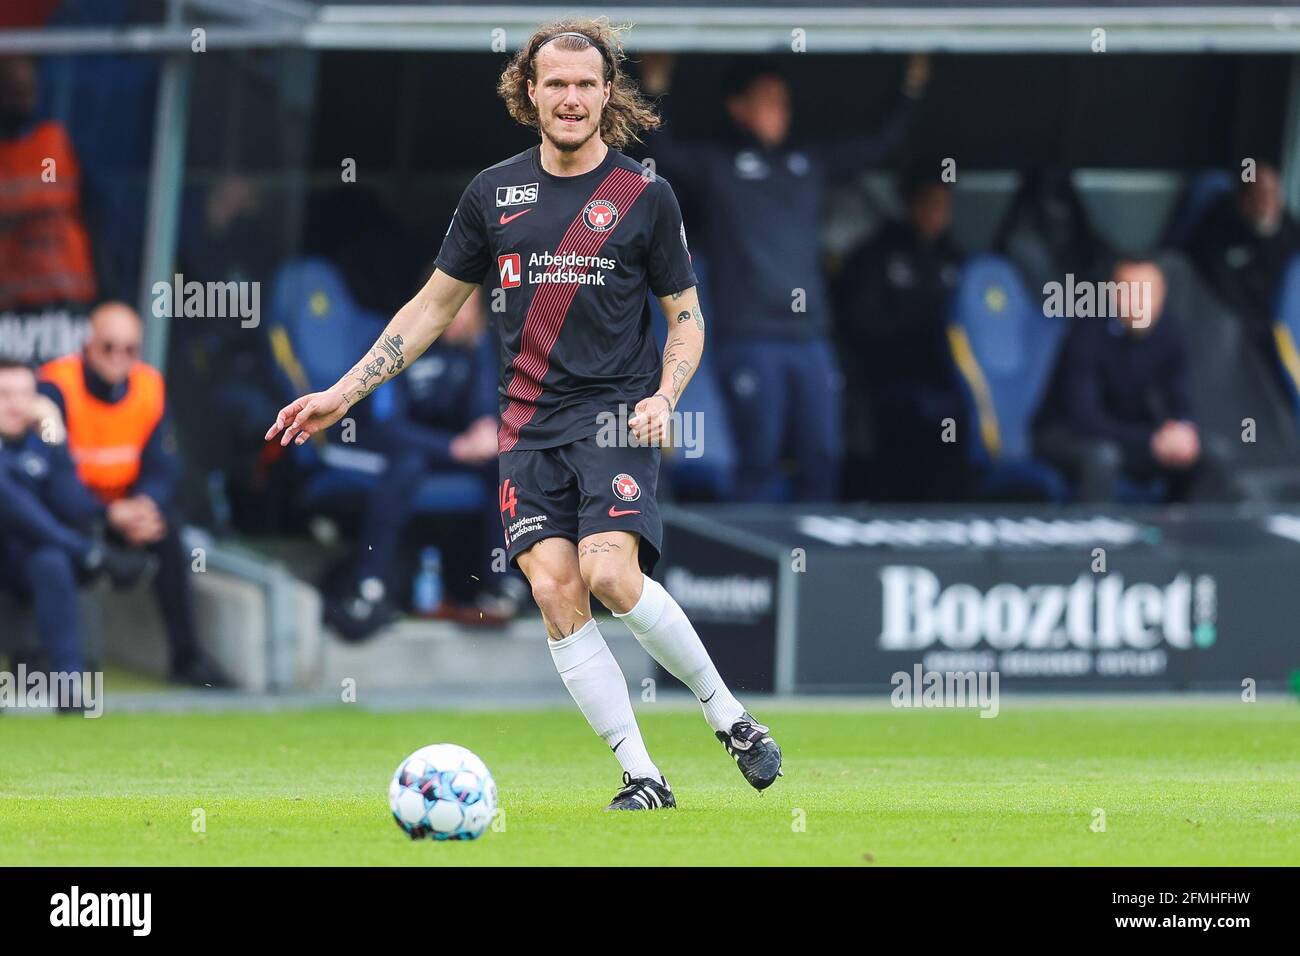 Brondby If Fc Midtjylland High Resolution Stock Photography and Images -  Alamy